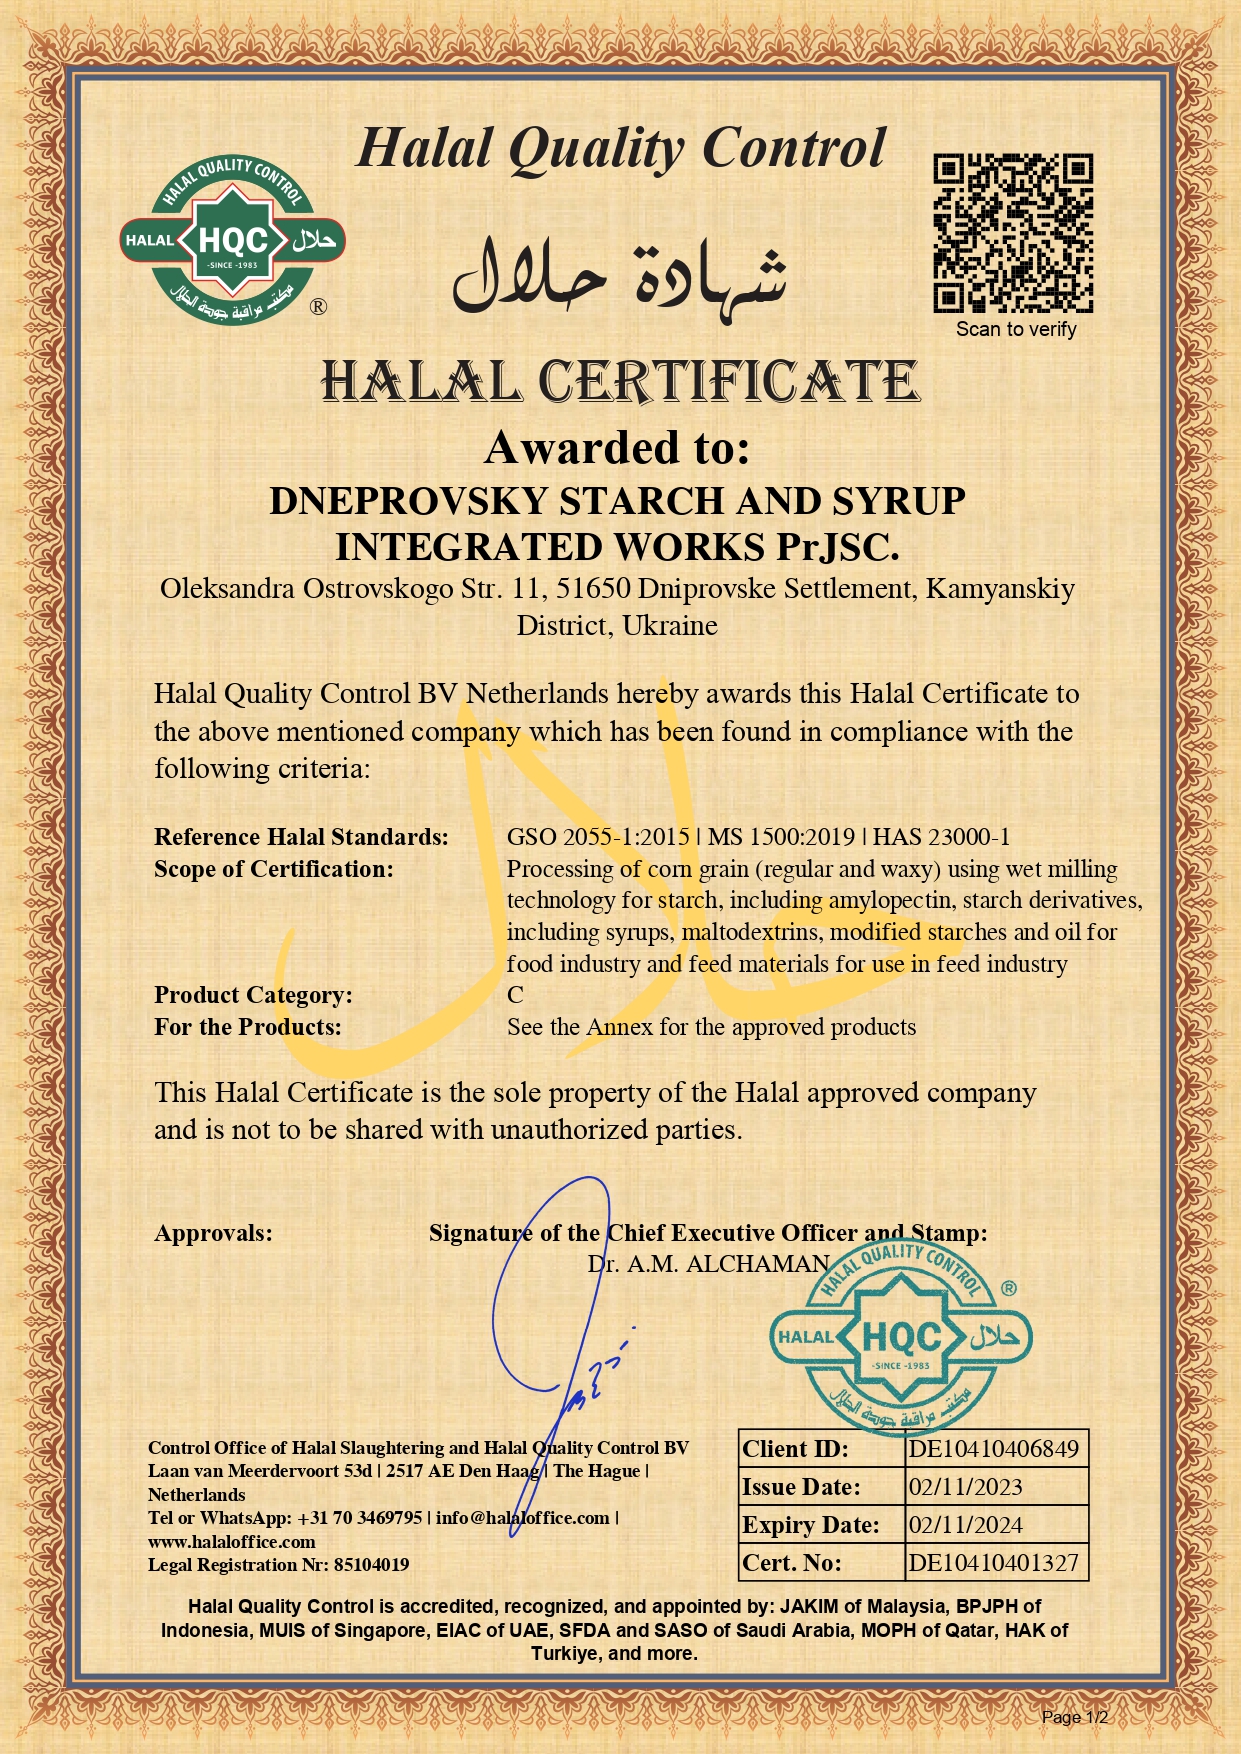 Halal Certificate Dneprovsky Starch and Syrup Integrated Works, PrLSC